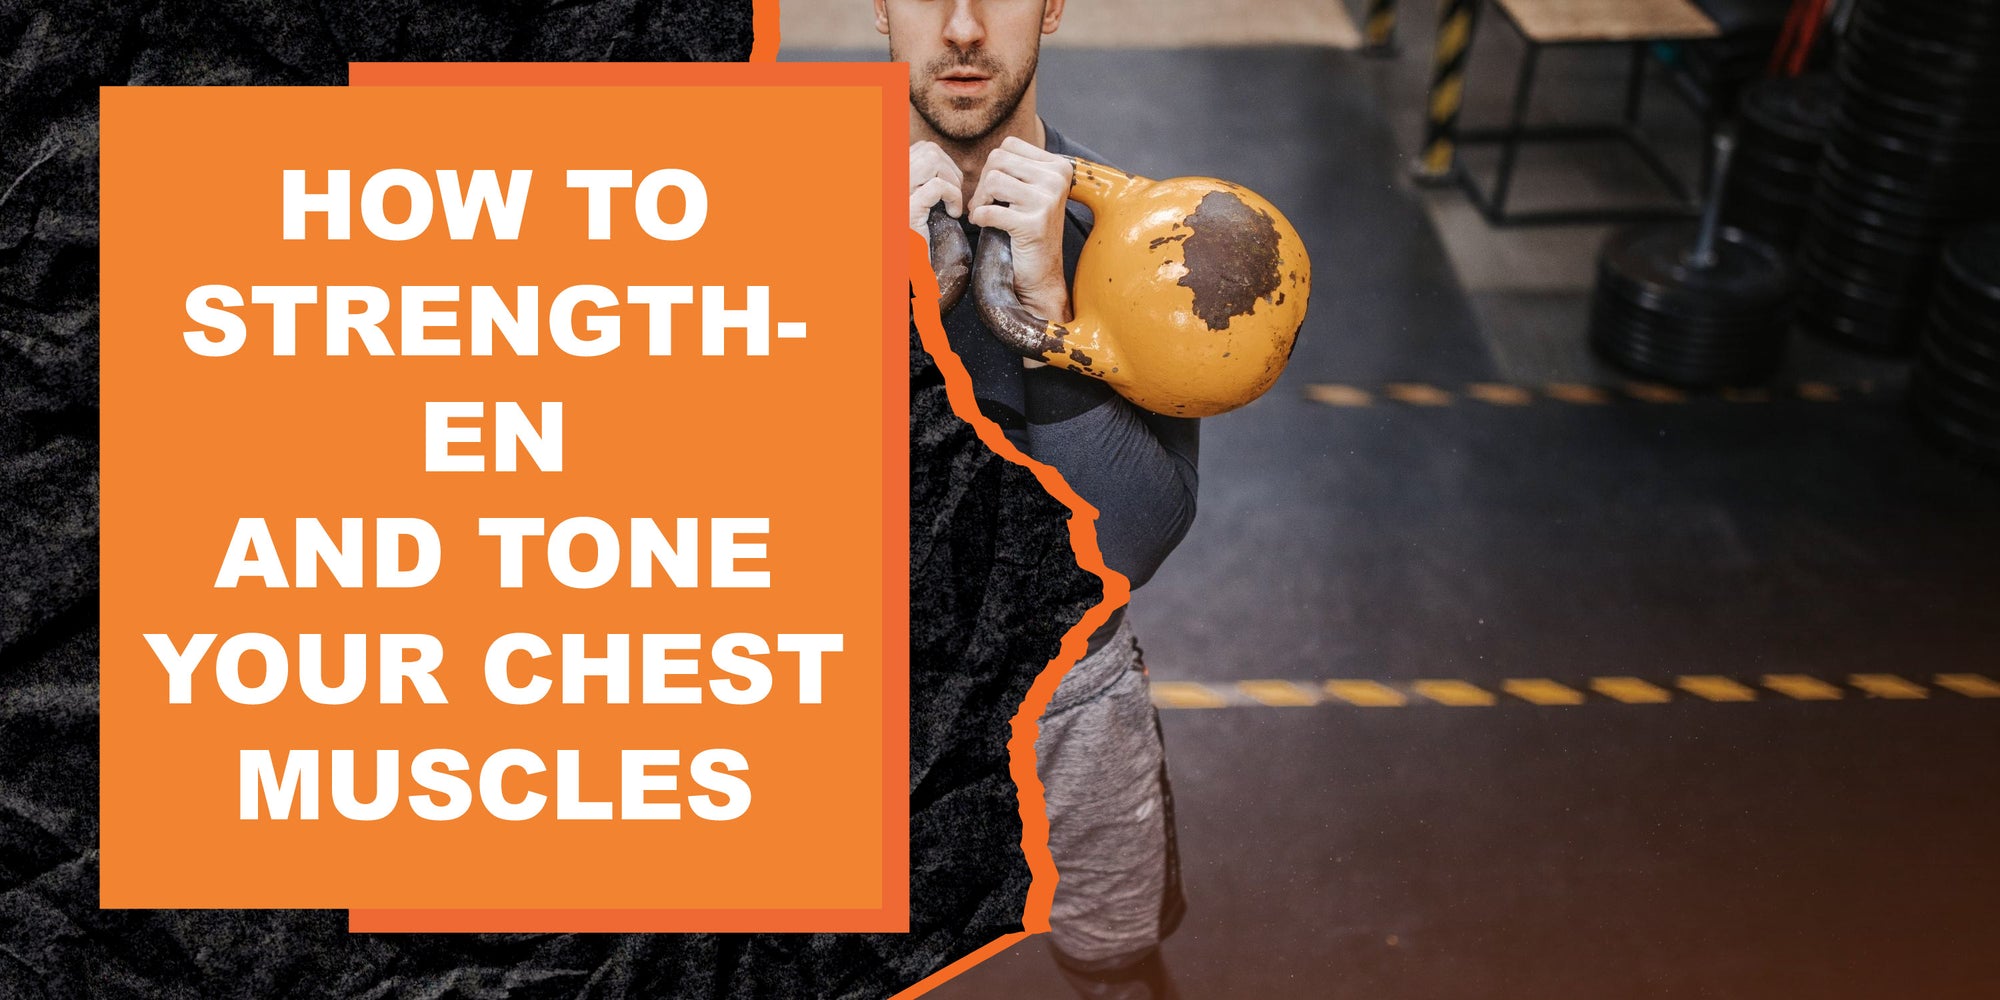 How to Strengthen and Tone Your Chest Muscles